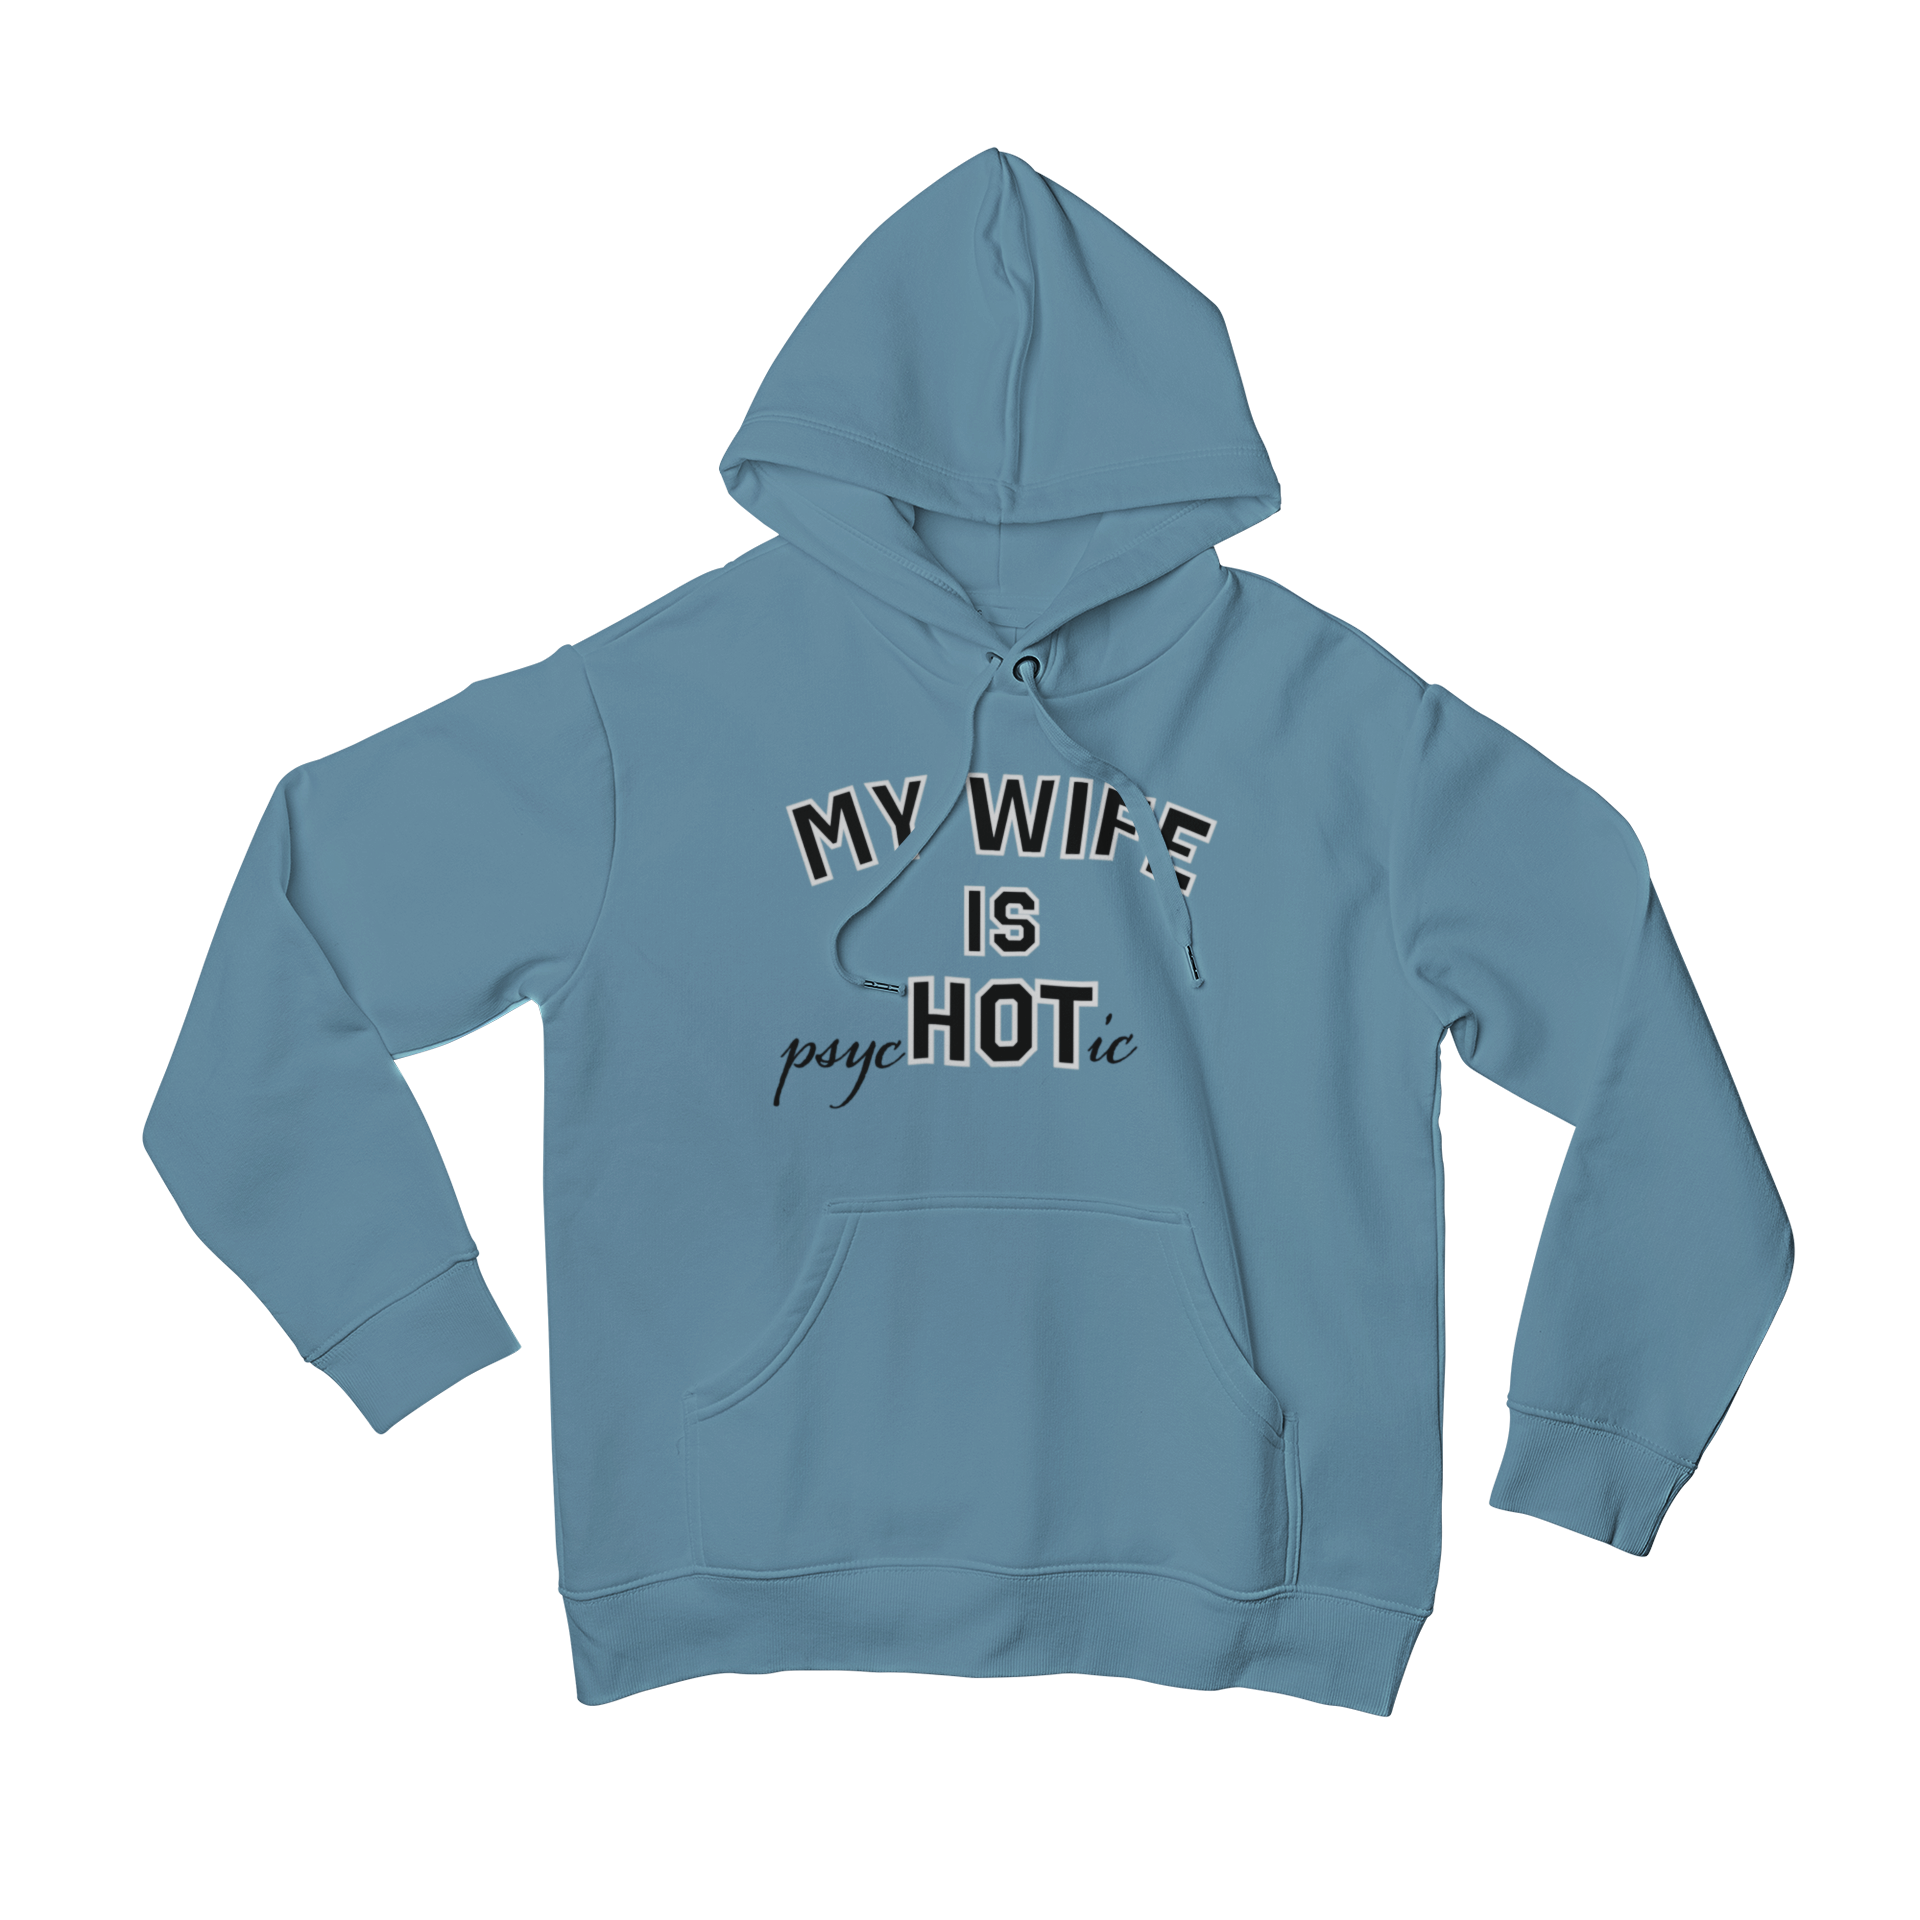 Teevolution presents the ultimate hoodie that will make you stand out. This trendy hoodie asks the burning question "Is your wife hot or psychotic?" Wear it and let everyone know that you have a great sense of humor. Get yours today!